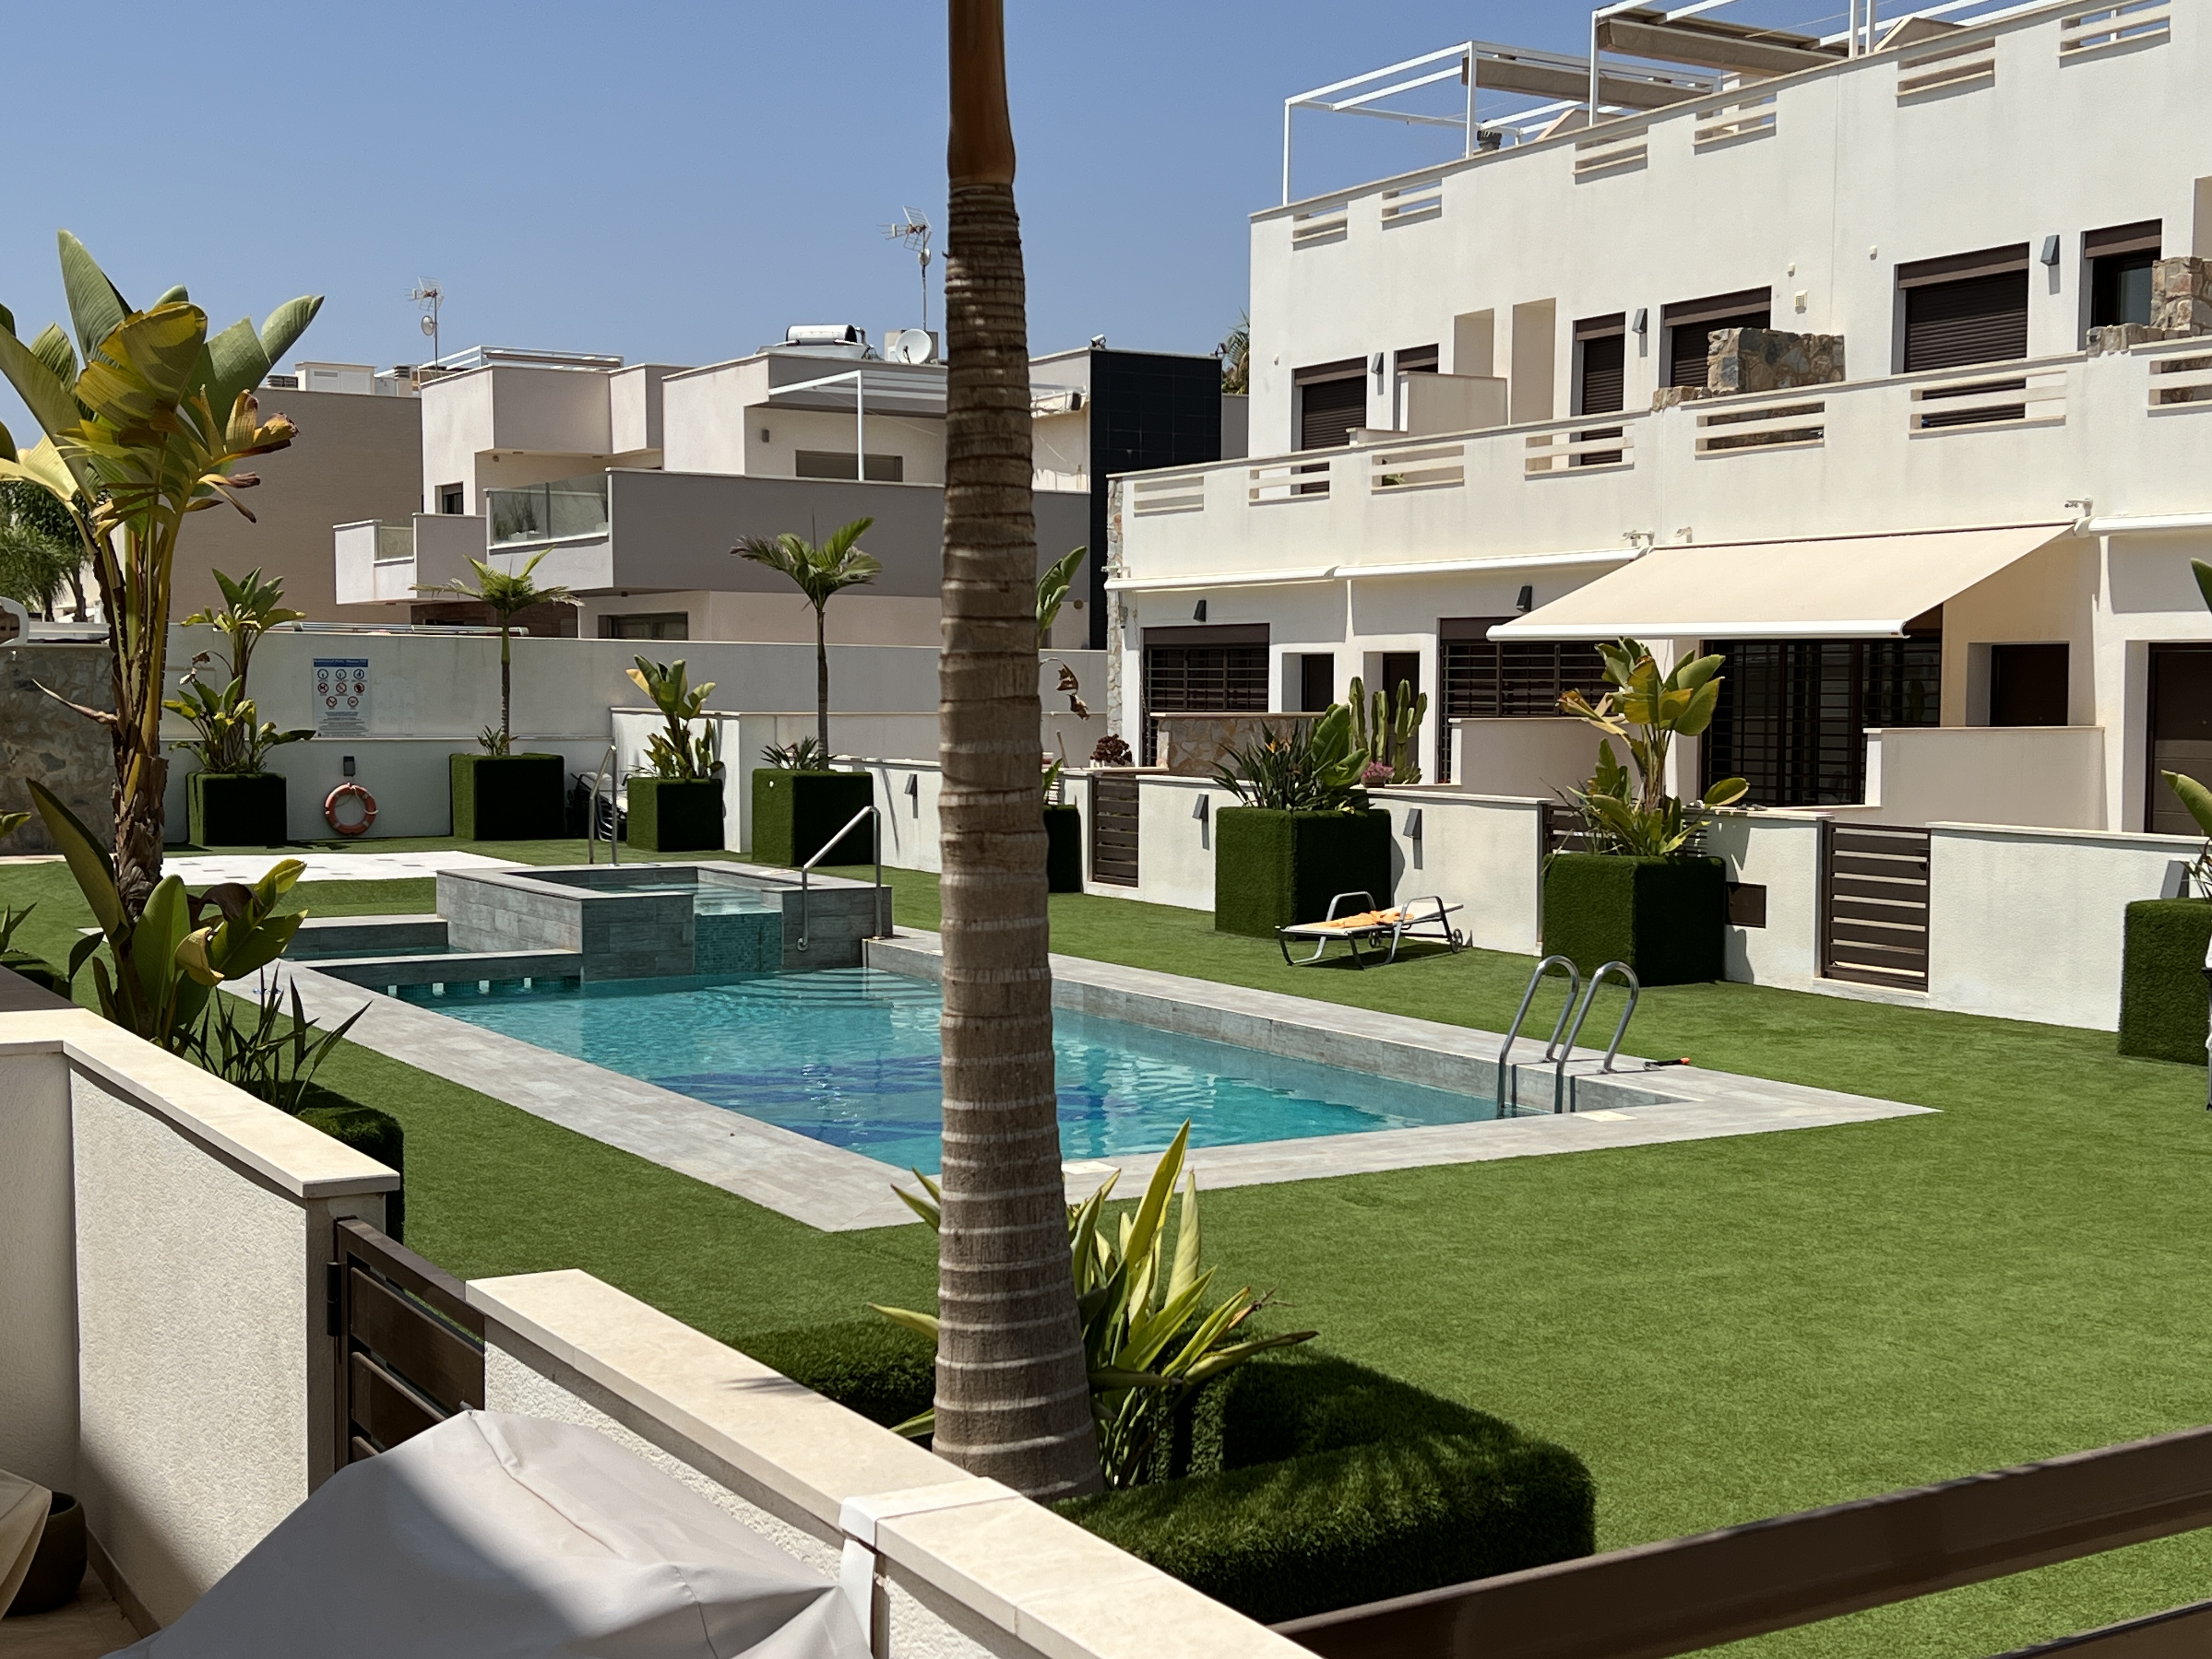 3 BED MODERN TOWNHOUSE ONLY 250 M TO THE BEACH,TORRE DE LA HORADADA